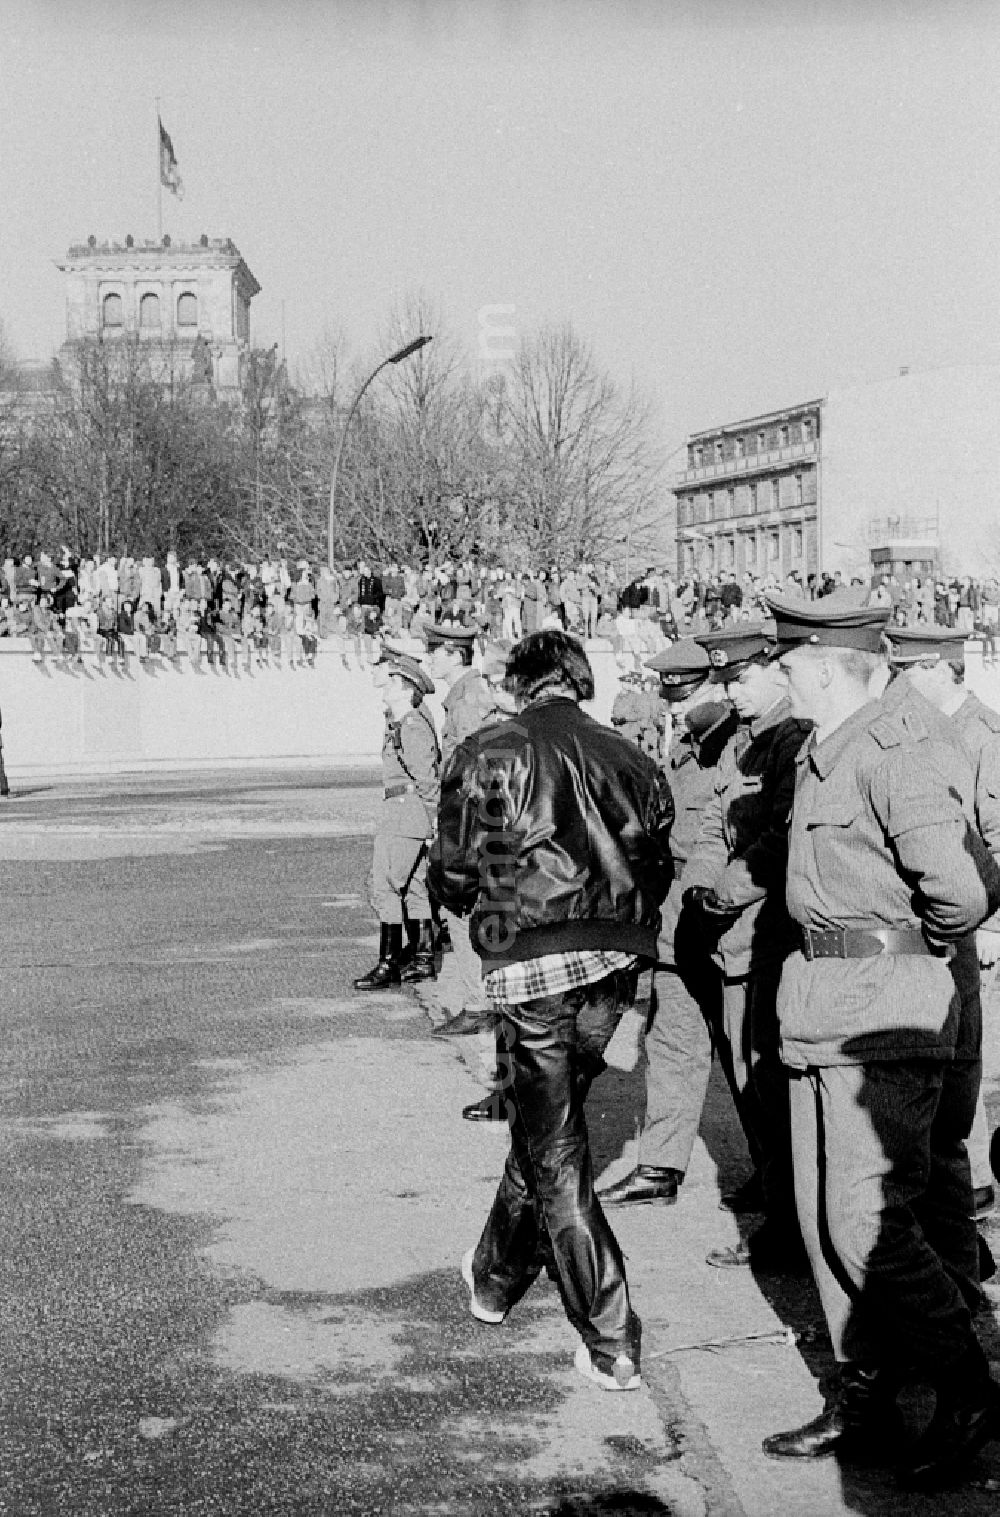 GDR picture archive: Berlin - Occupation of the tank wall at the front of the Brandenburg Gate in Berlin-Mitte. Several hundred people from West Berlin climbed and occupied the meter-high concrete barriers of the GDR border on the square in front of the Berlin landmark under the eyes of onlookers soldiers of the Border Troops of the GDR